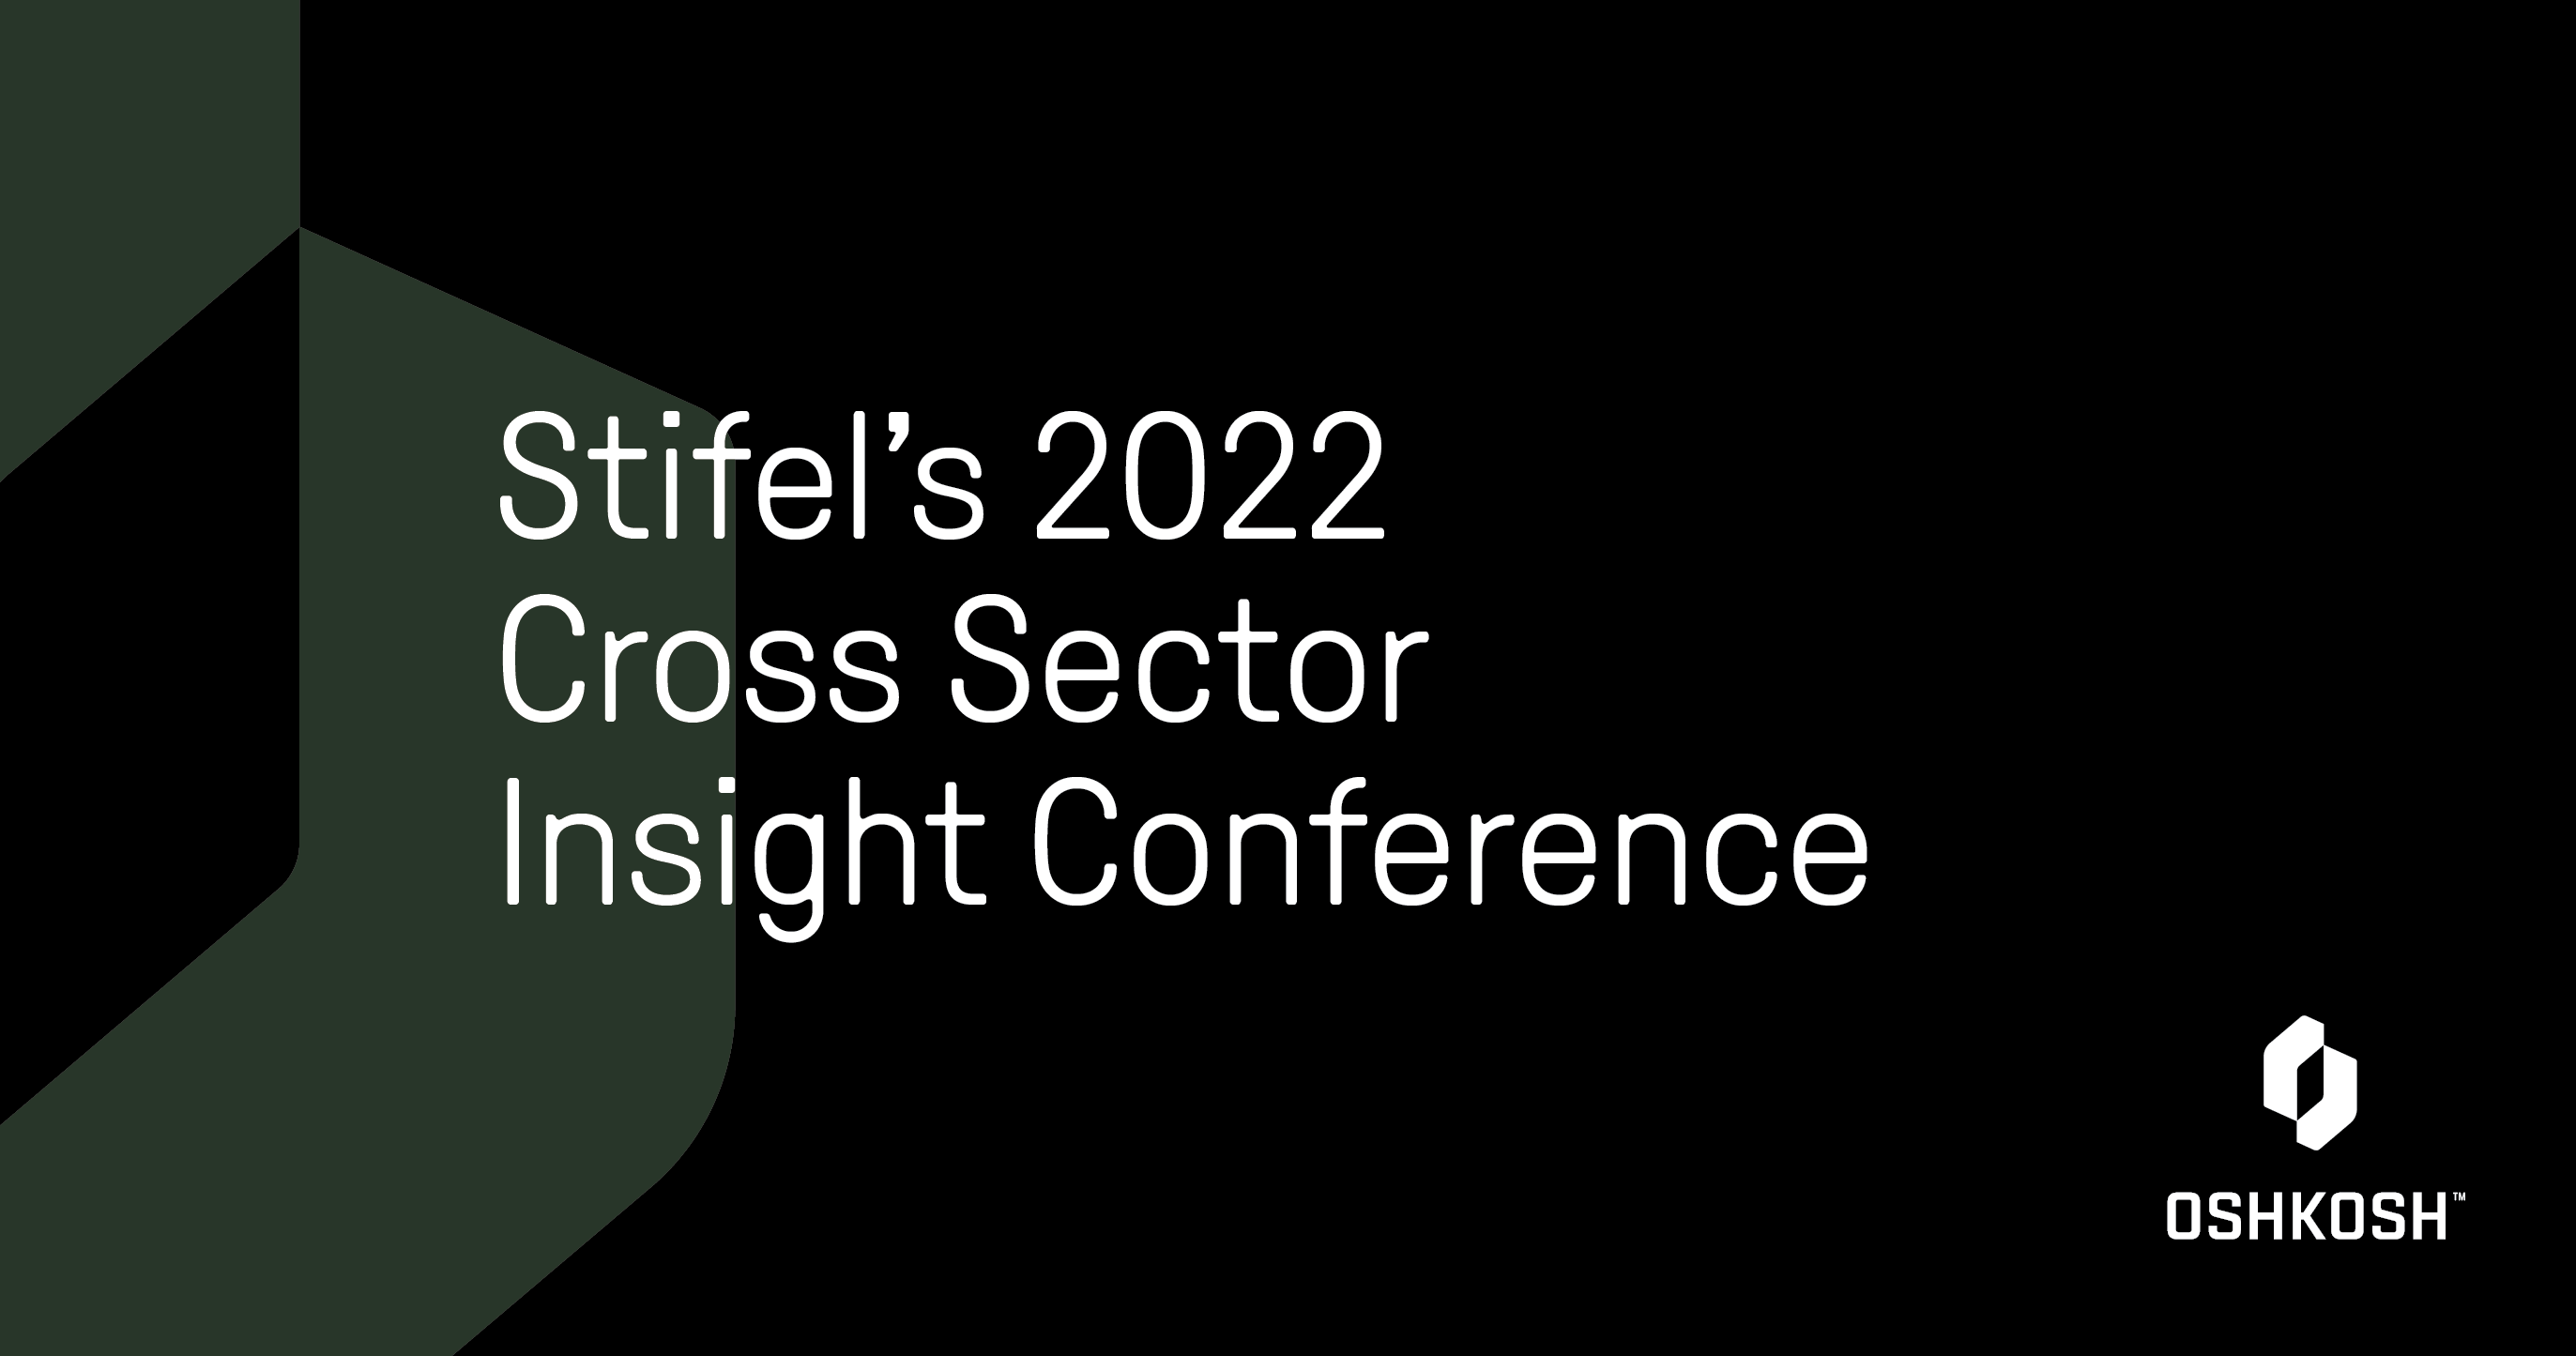 Black background with green cropped logo mark and white Oshkosh logo that reads Stifel's 2022 Cross Sector Insight Conference